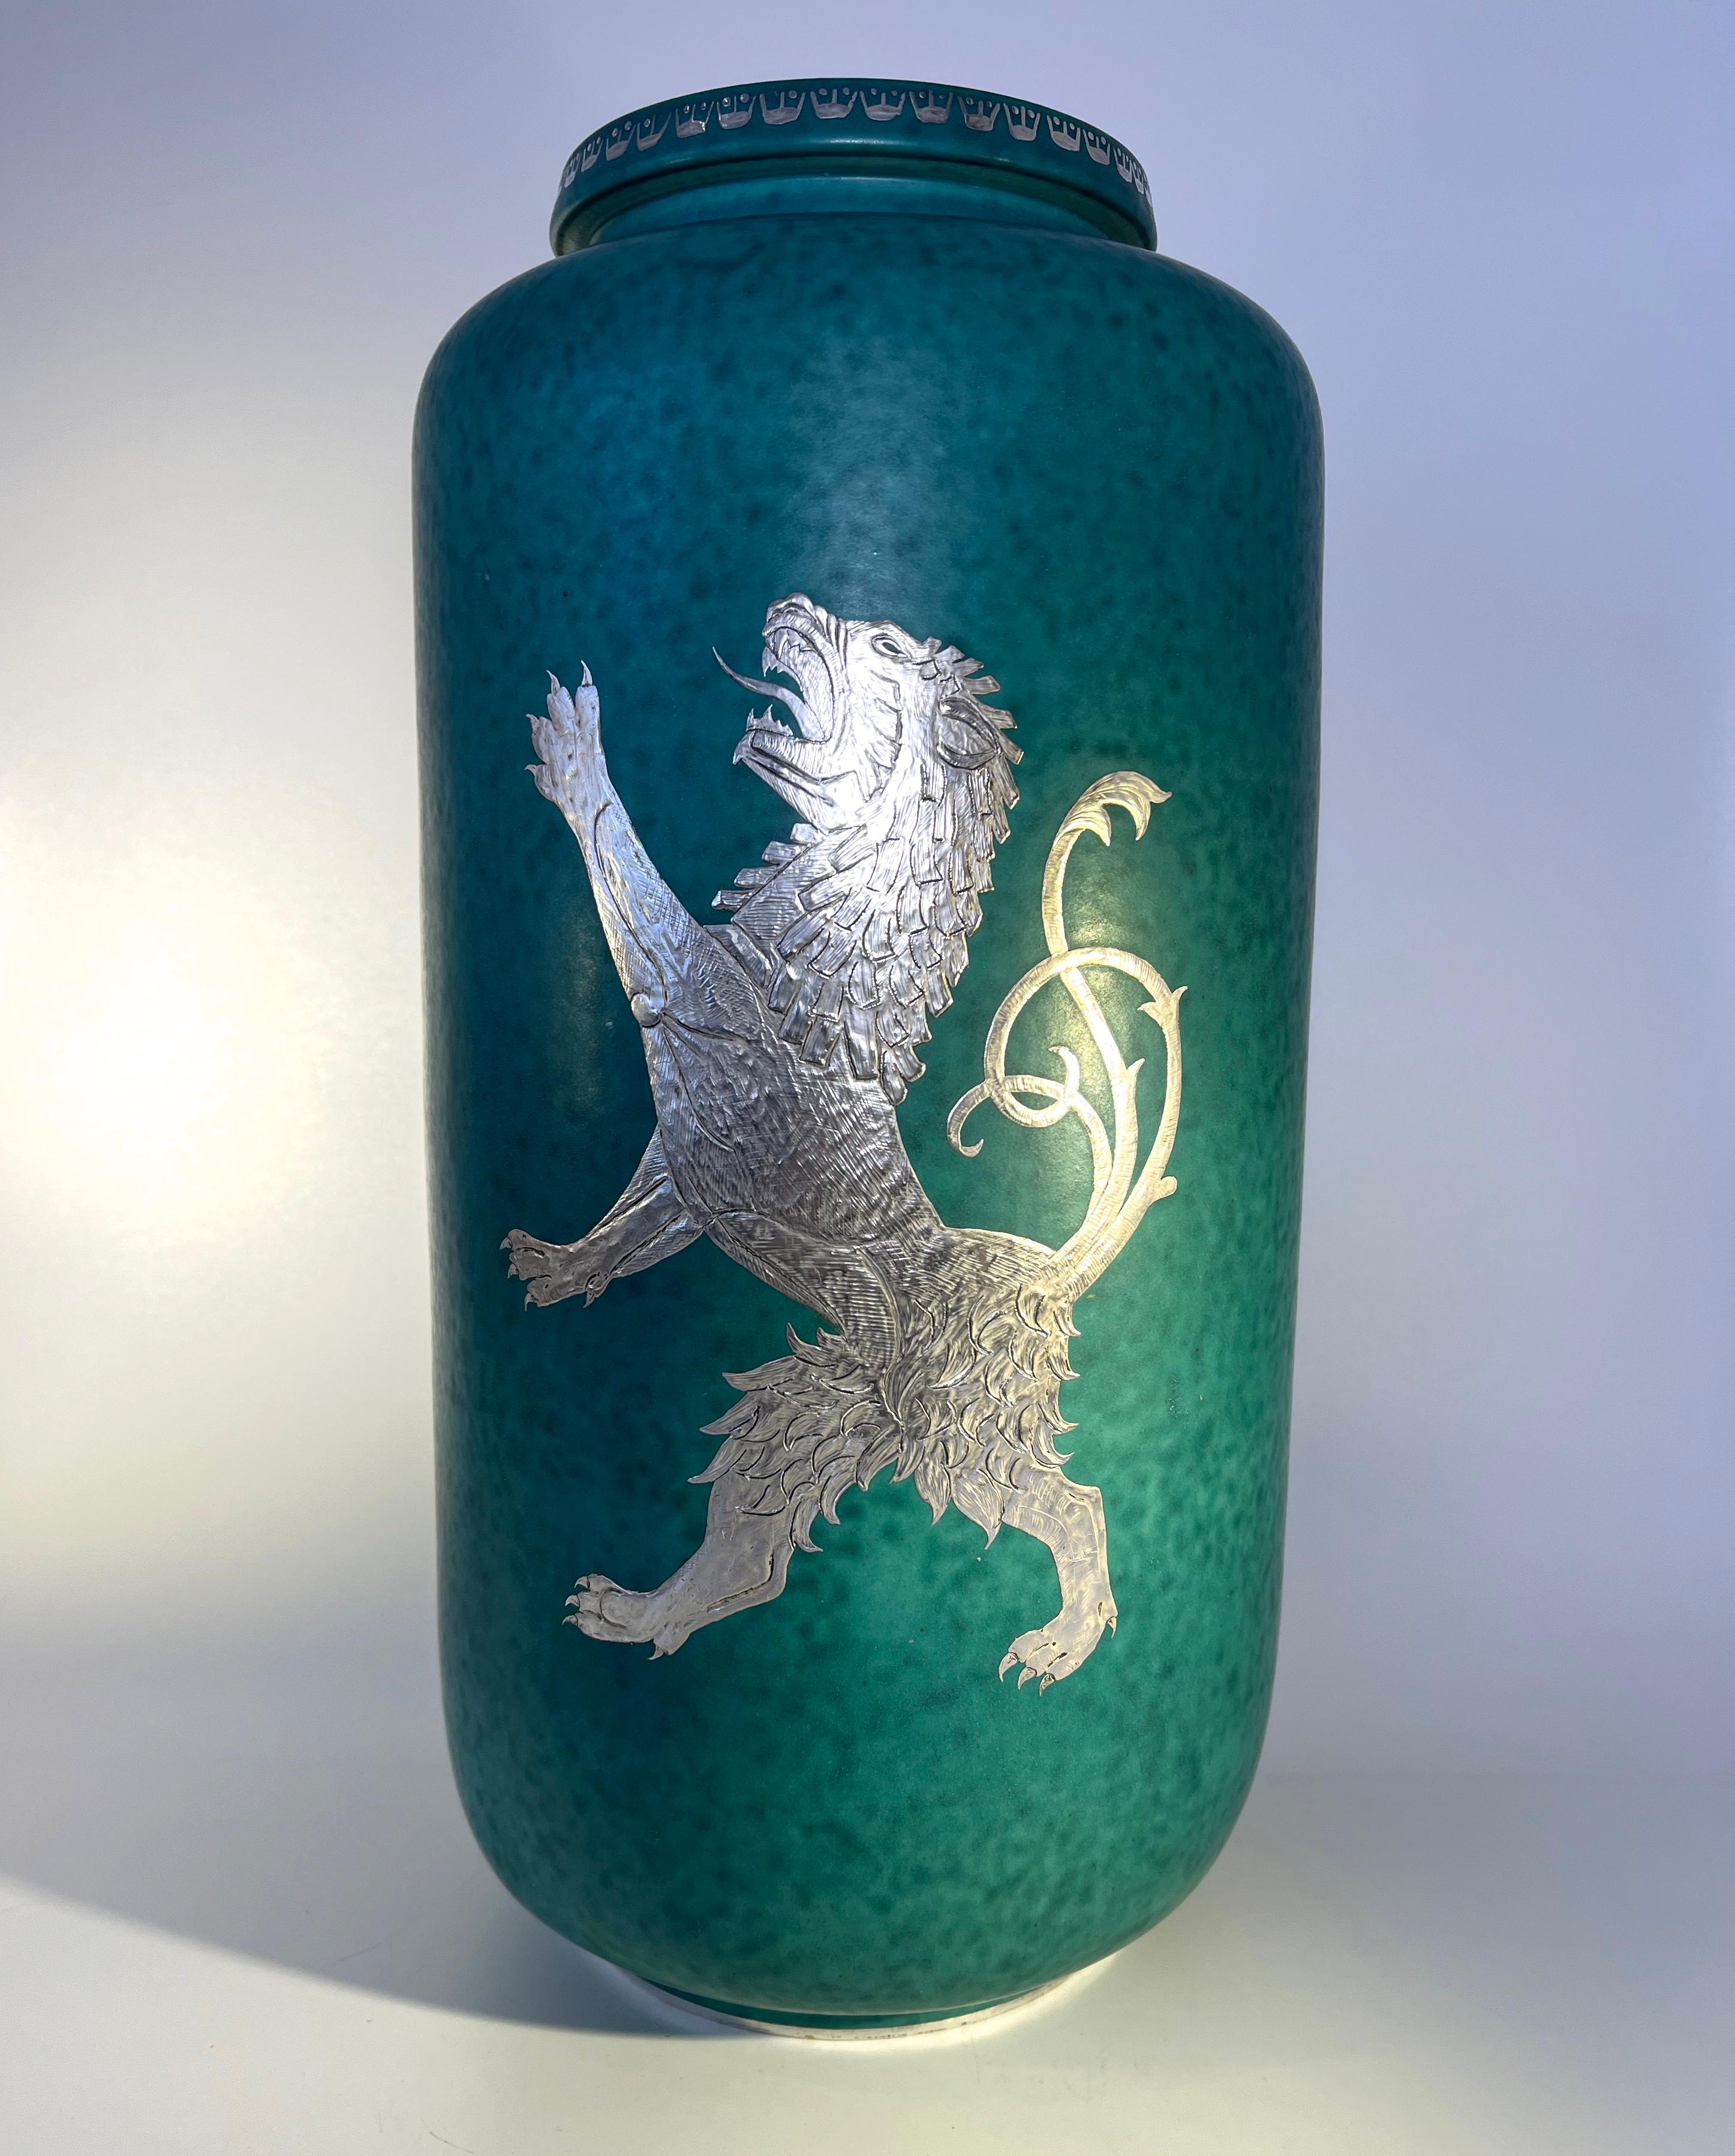 Magnificent Lion Rampant gigantic urn vase by Wilhelm Kage for Gustavsberg, Sweden
An imposing and grand piece from the Argenta series
Green mottled stoneware vase decorated with applied silver
Without question, a connosieur piece 
Circa 1941 Date